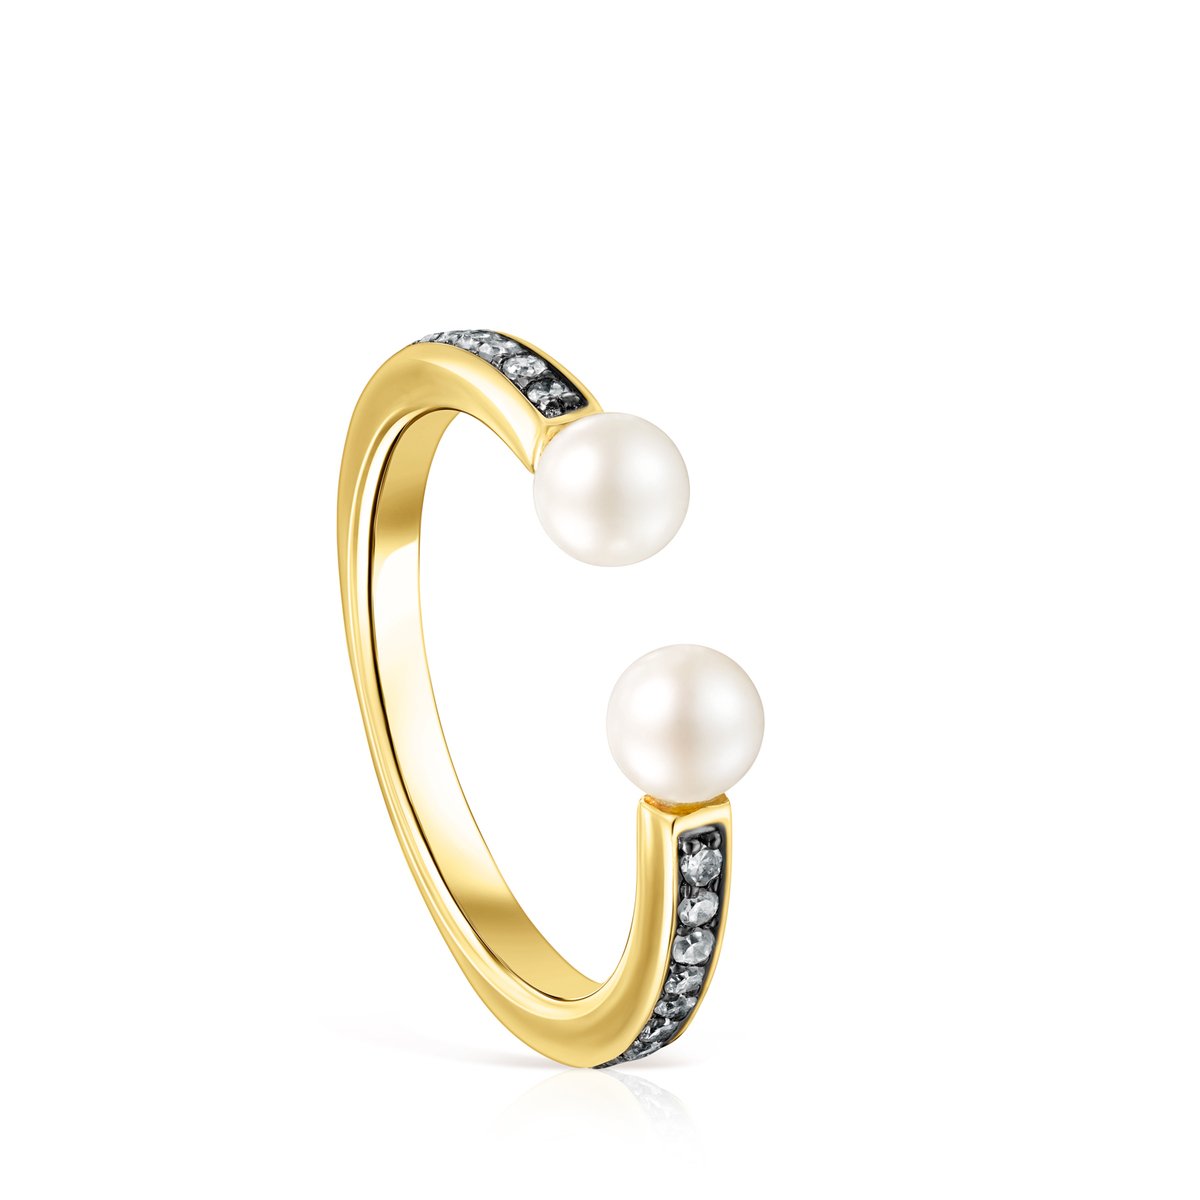 Tous Nocturne Ring in Gold Vermeil with Diamonds and Pearls 918445510 –